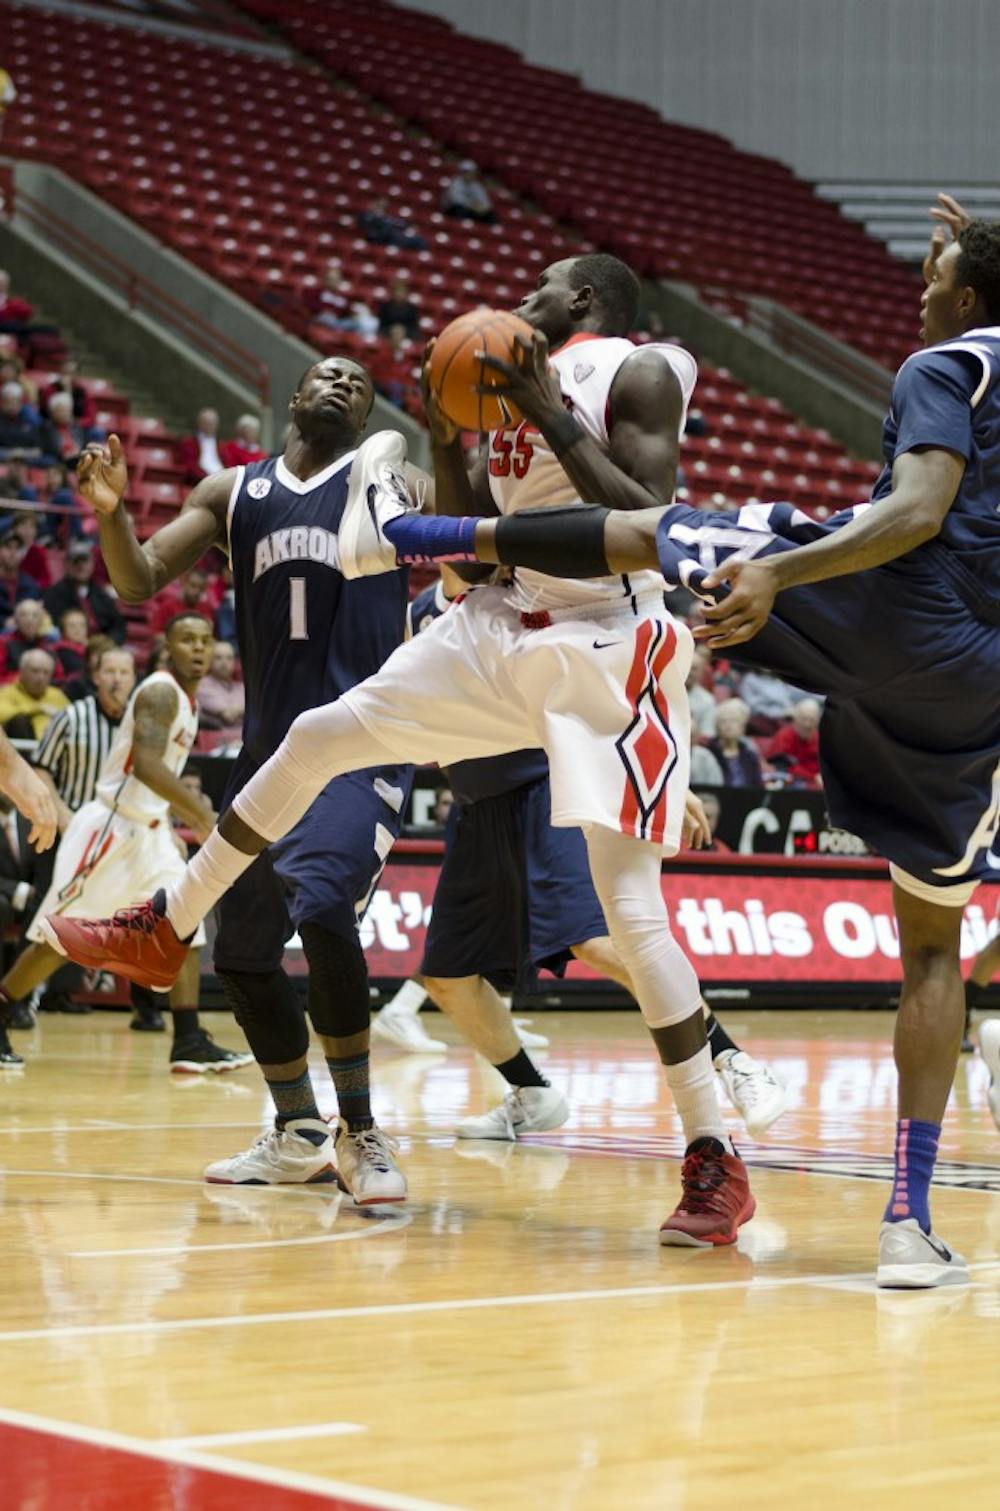 Senior center Majok Majok brings down a rebound in the first half of the game against Akron on Jan. 8 at Worthen Arena. DN PHOTO BREANNA DAUGHERTY